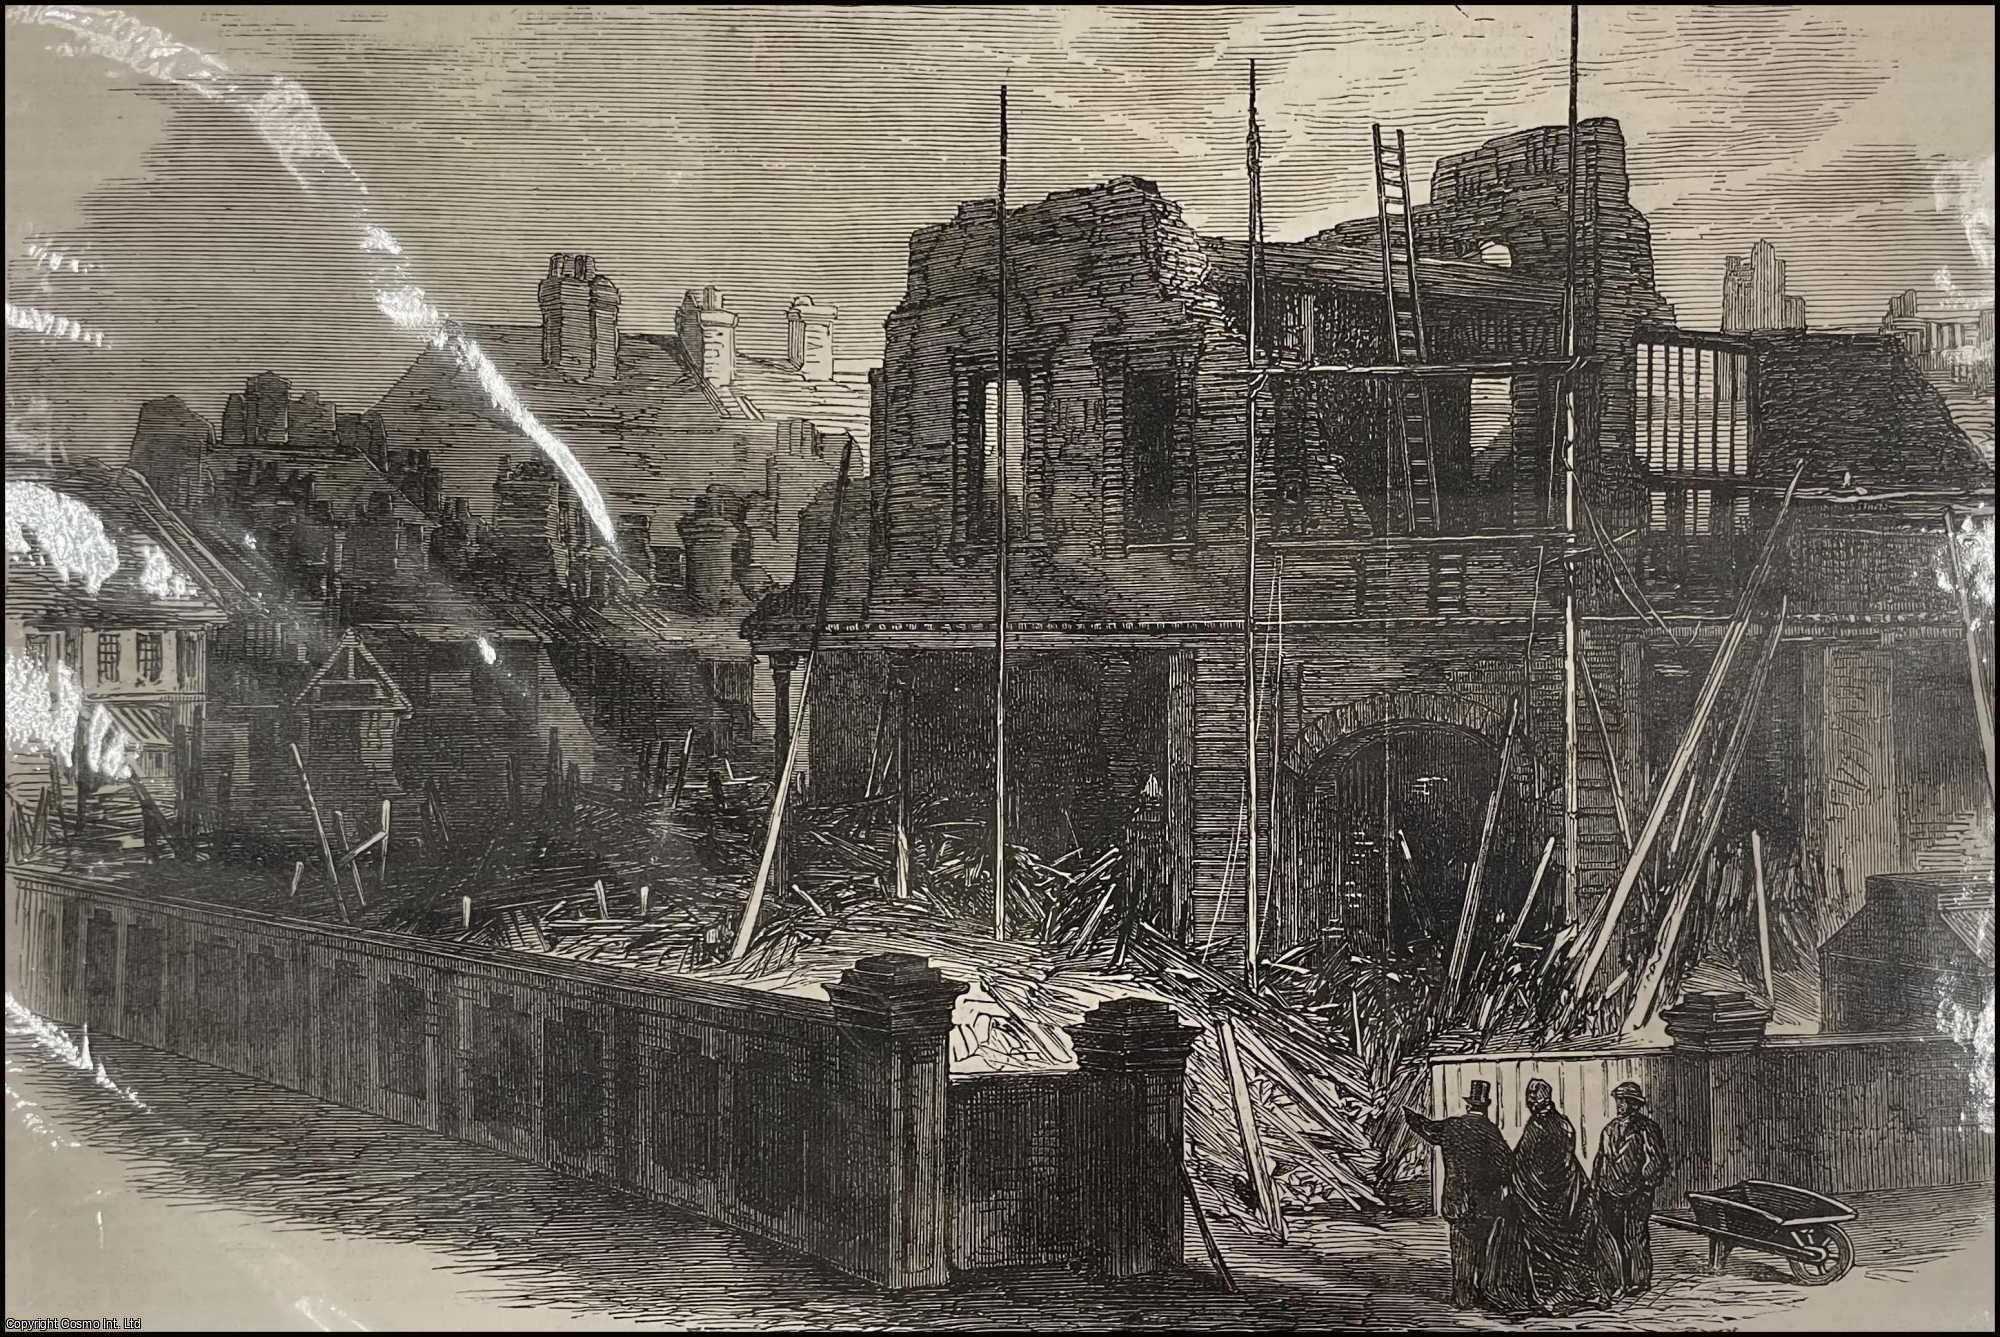 HULL - Ruins of the Houses Destroyed by Storm in Hull. An original print from the Illustrated London News, 1866.